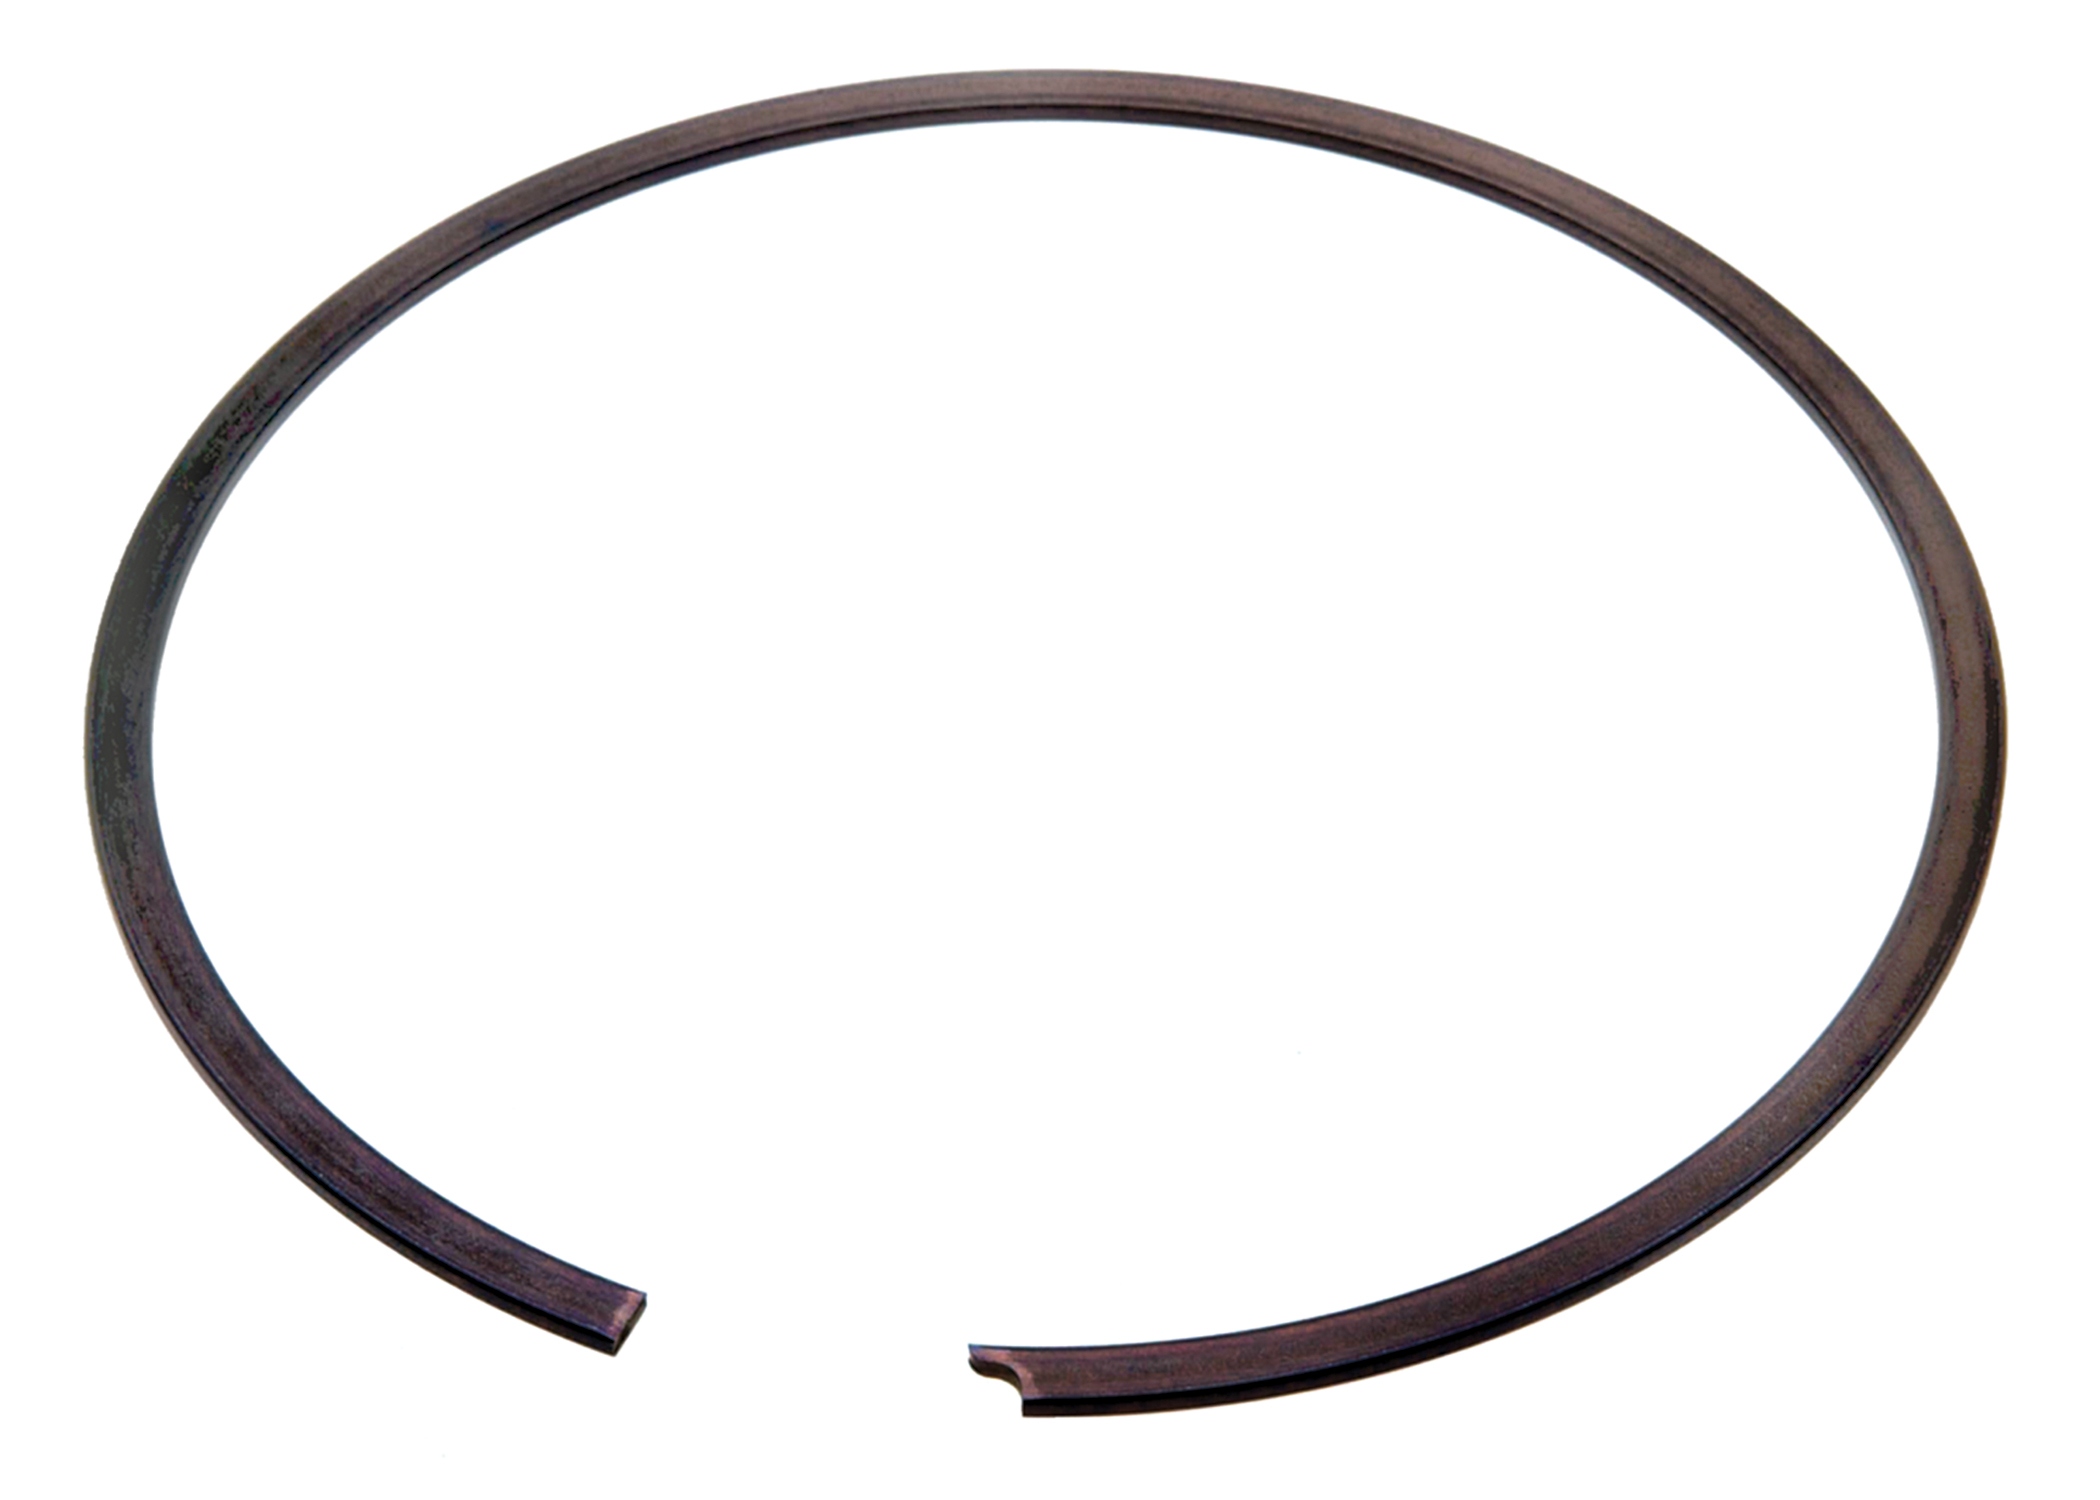 GM GENUINE PARTS - Automatic Transmission Clutch Backing Plate Retaining Ring - GMP 8663636